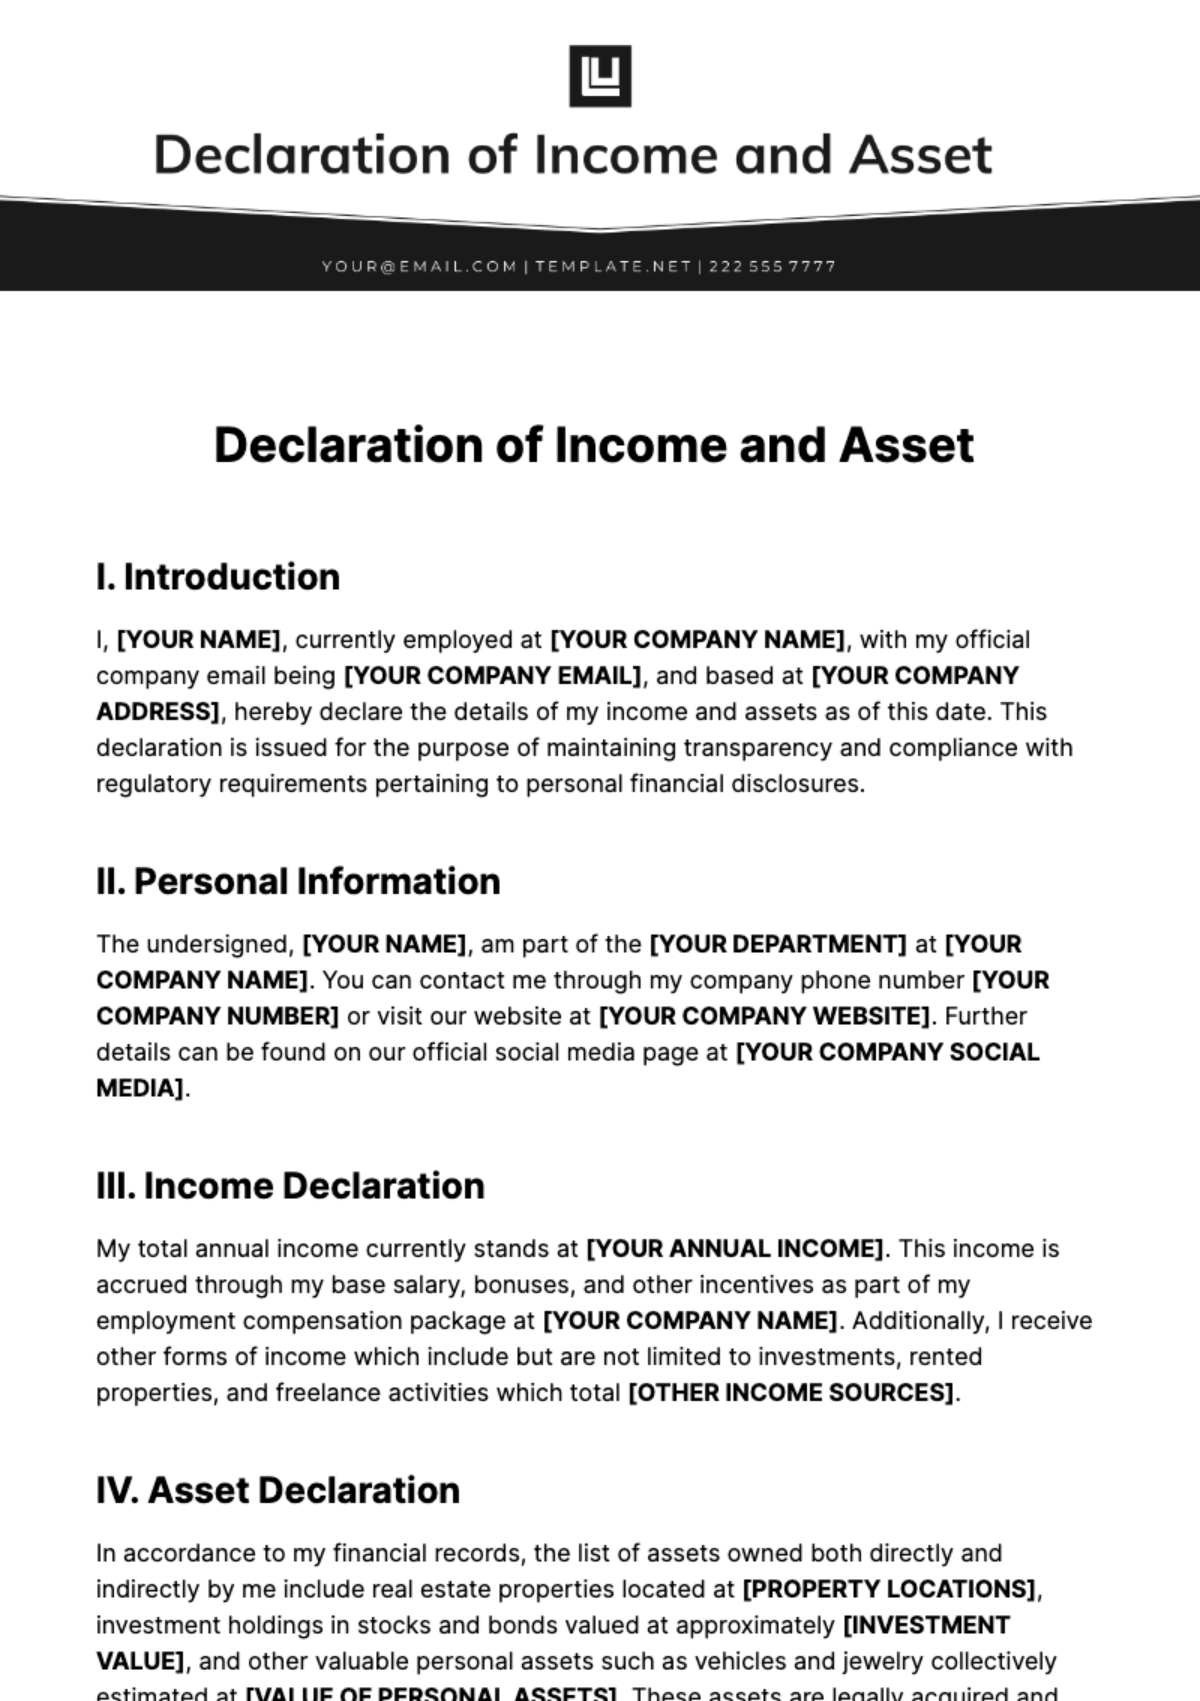 Free Declaration of Income and Asset Template